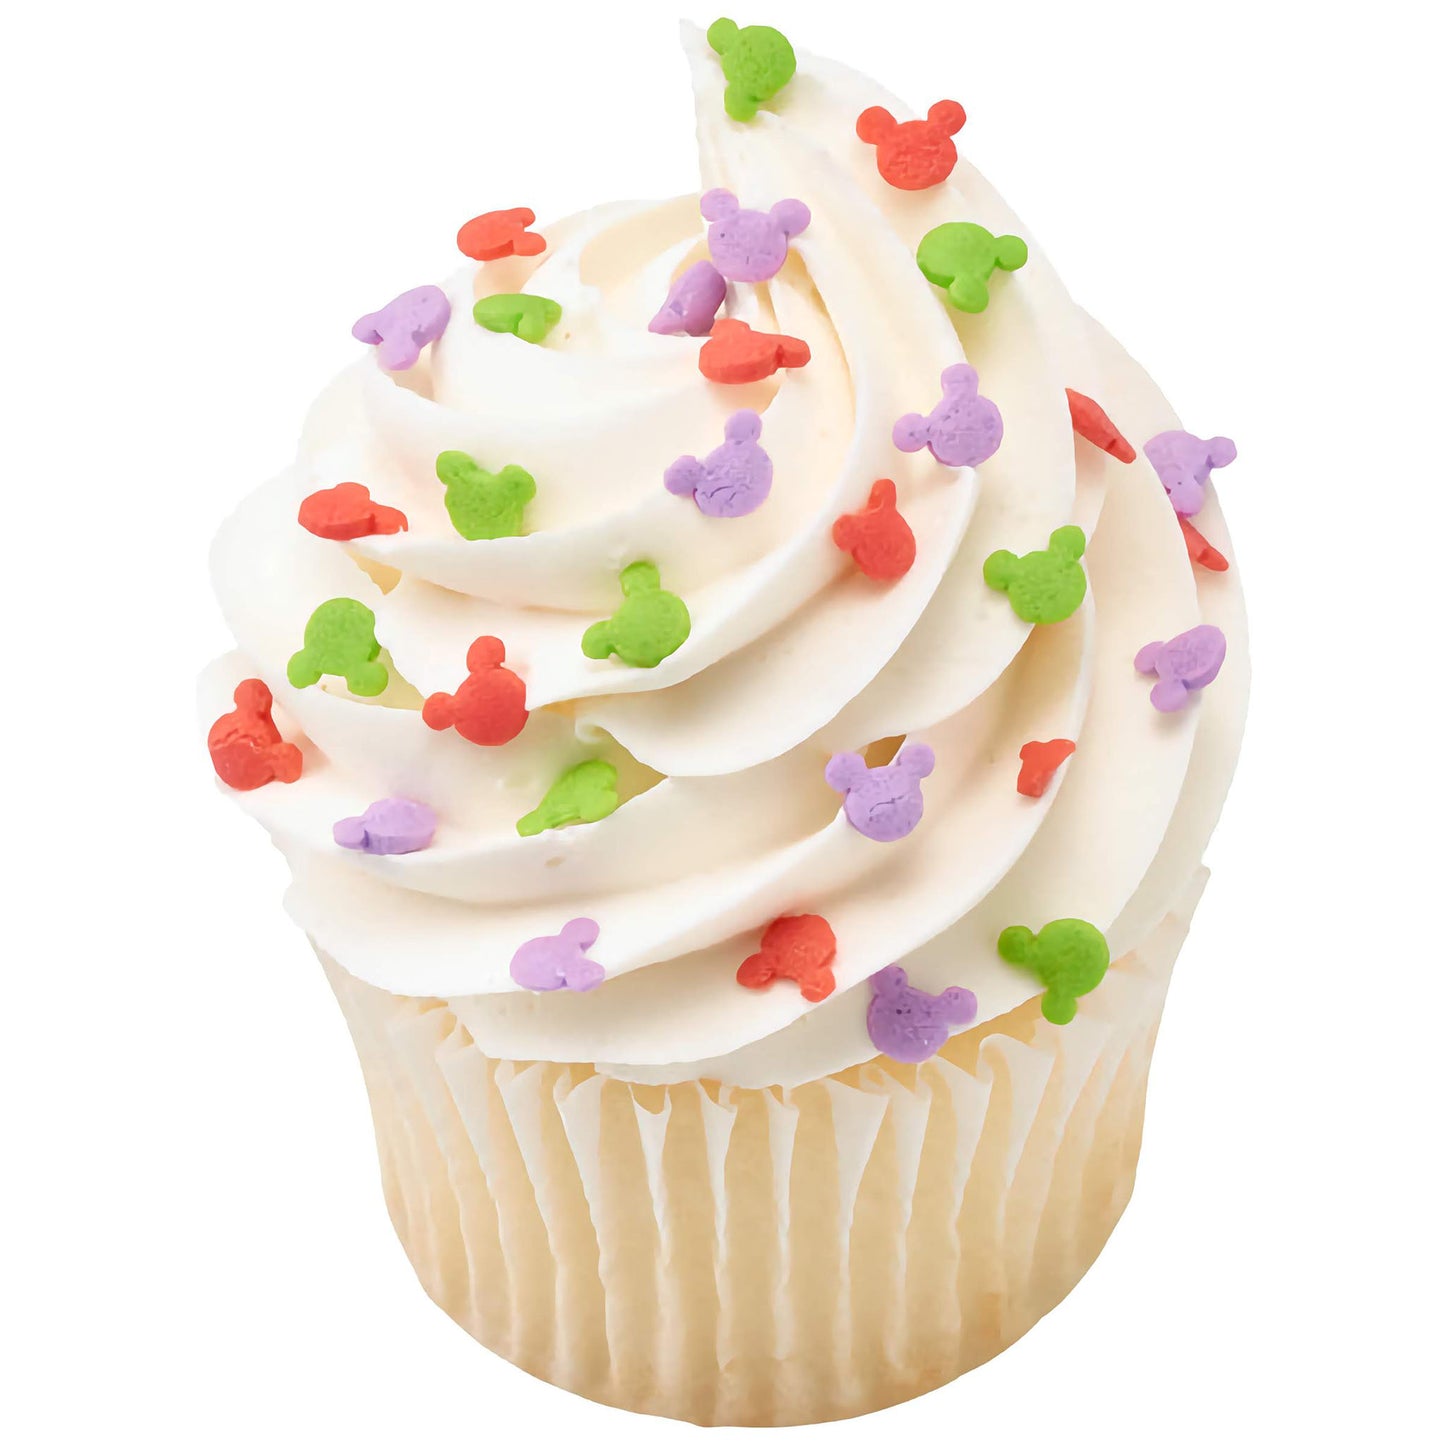 A cupcake with creamy white frosting, sprinkled with Mickey Mouse-shaped quin sprinkles in pastel green, purple, and red, creating a fun and celebratory dessert look.